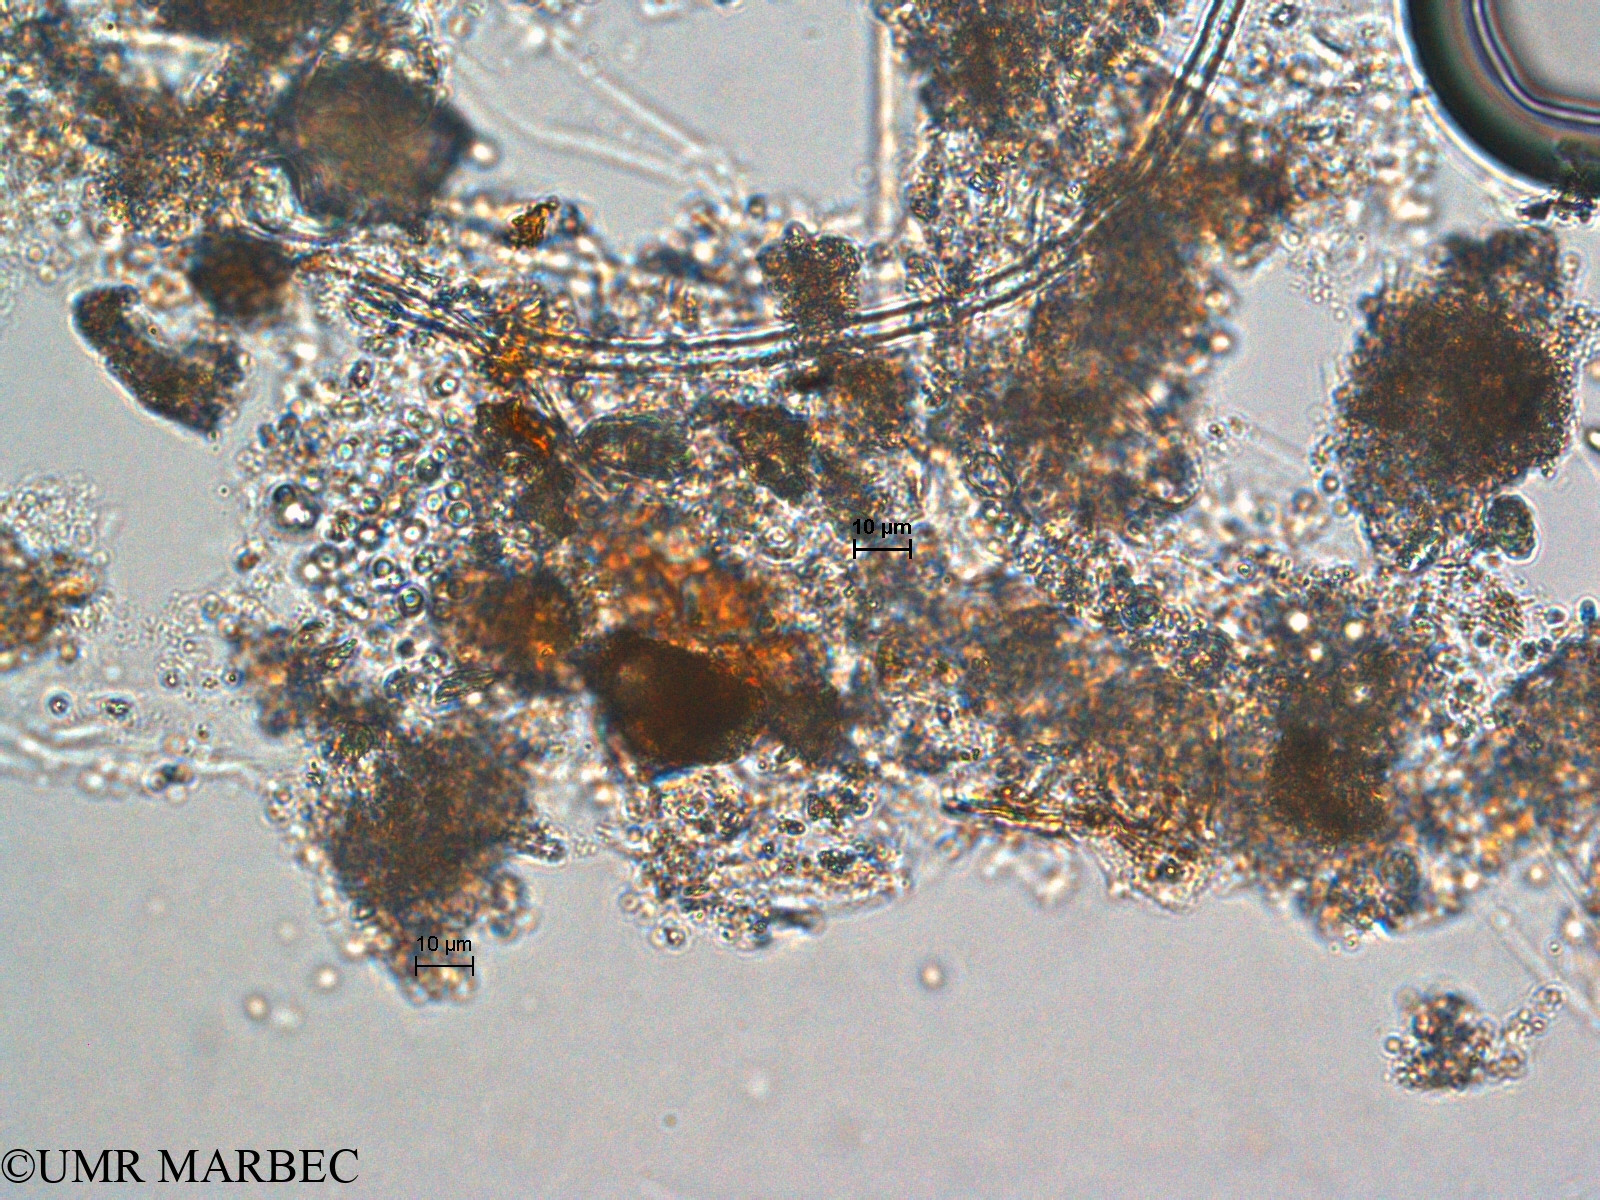 phyto/Scattered_Islands/europa/COMMA April 2011/Aphanocapsa sp4 (ancien Chroococcus sp7)(copy).jpg